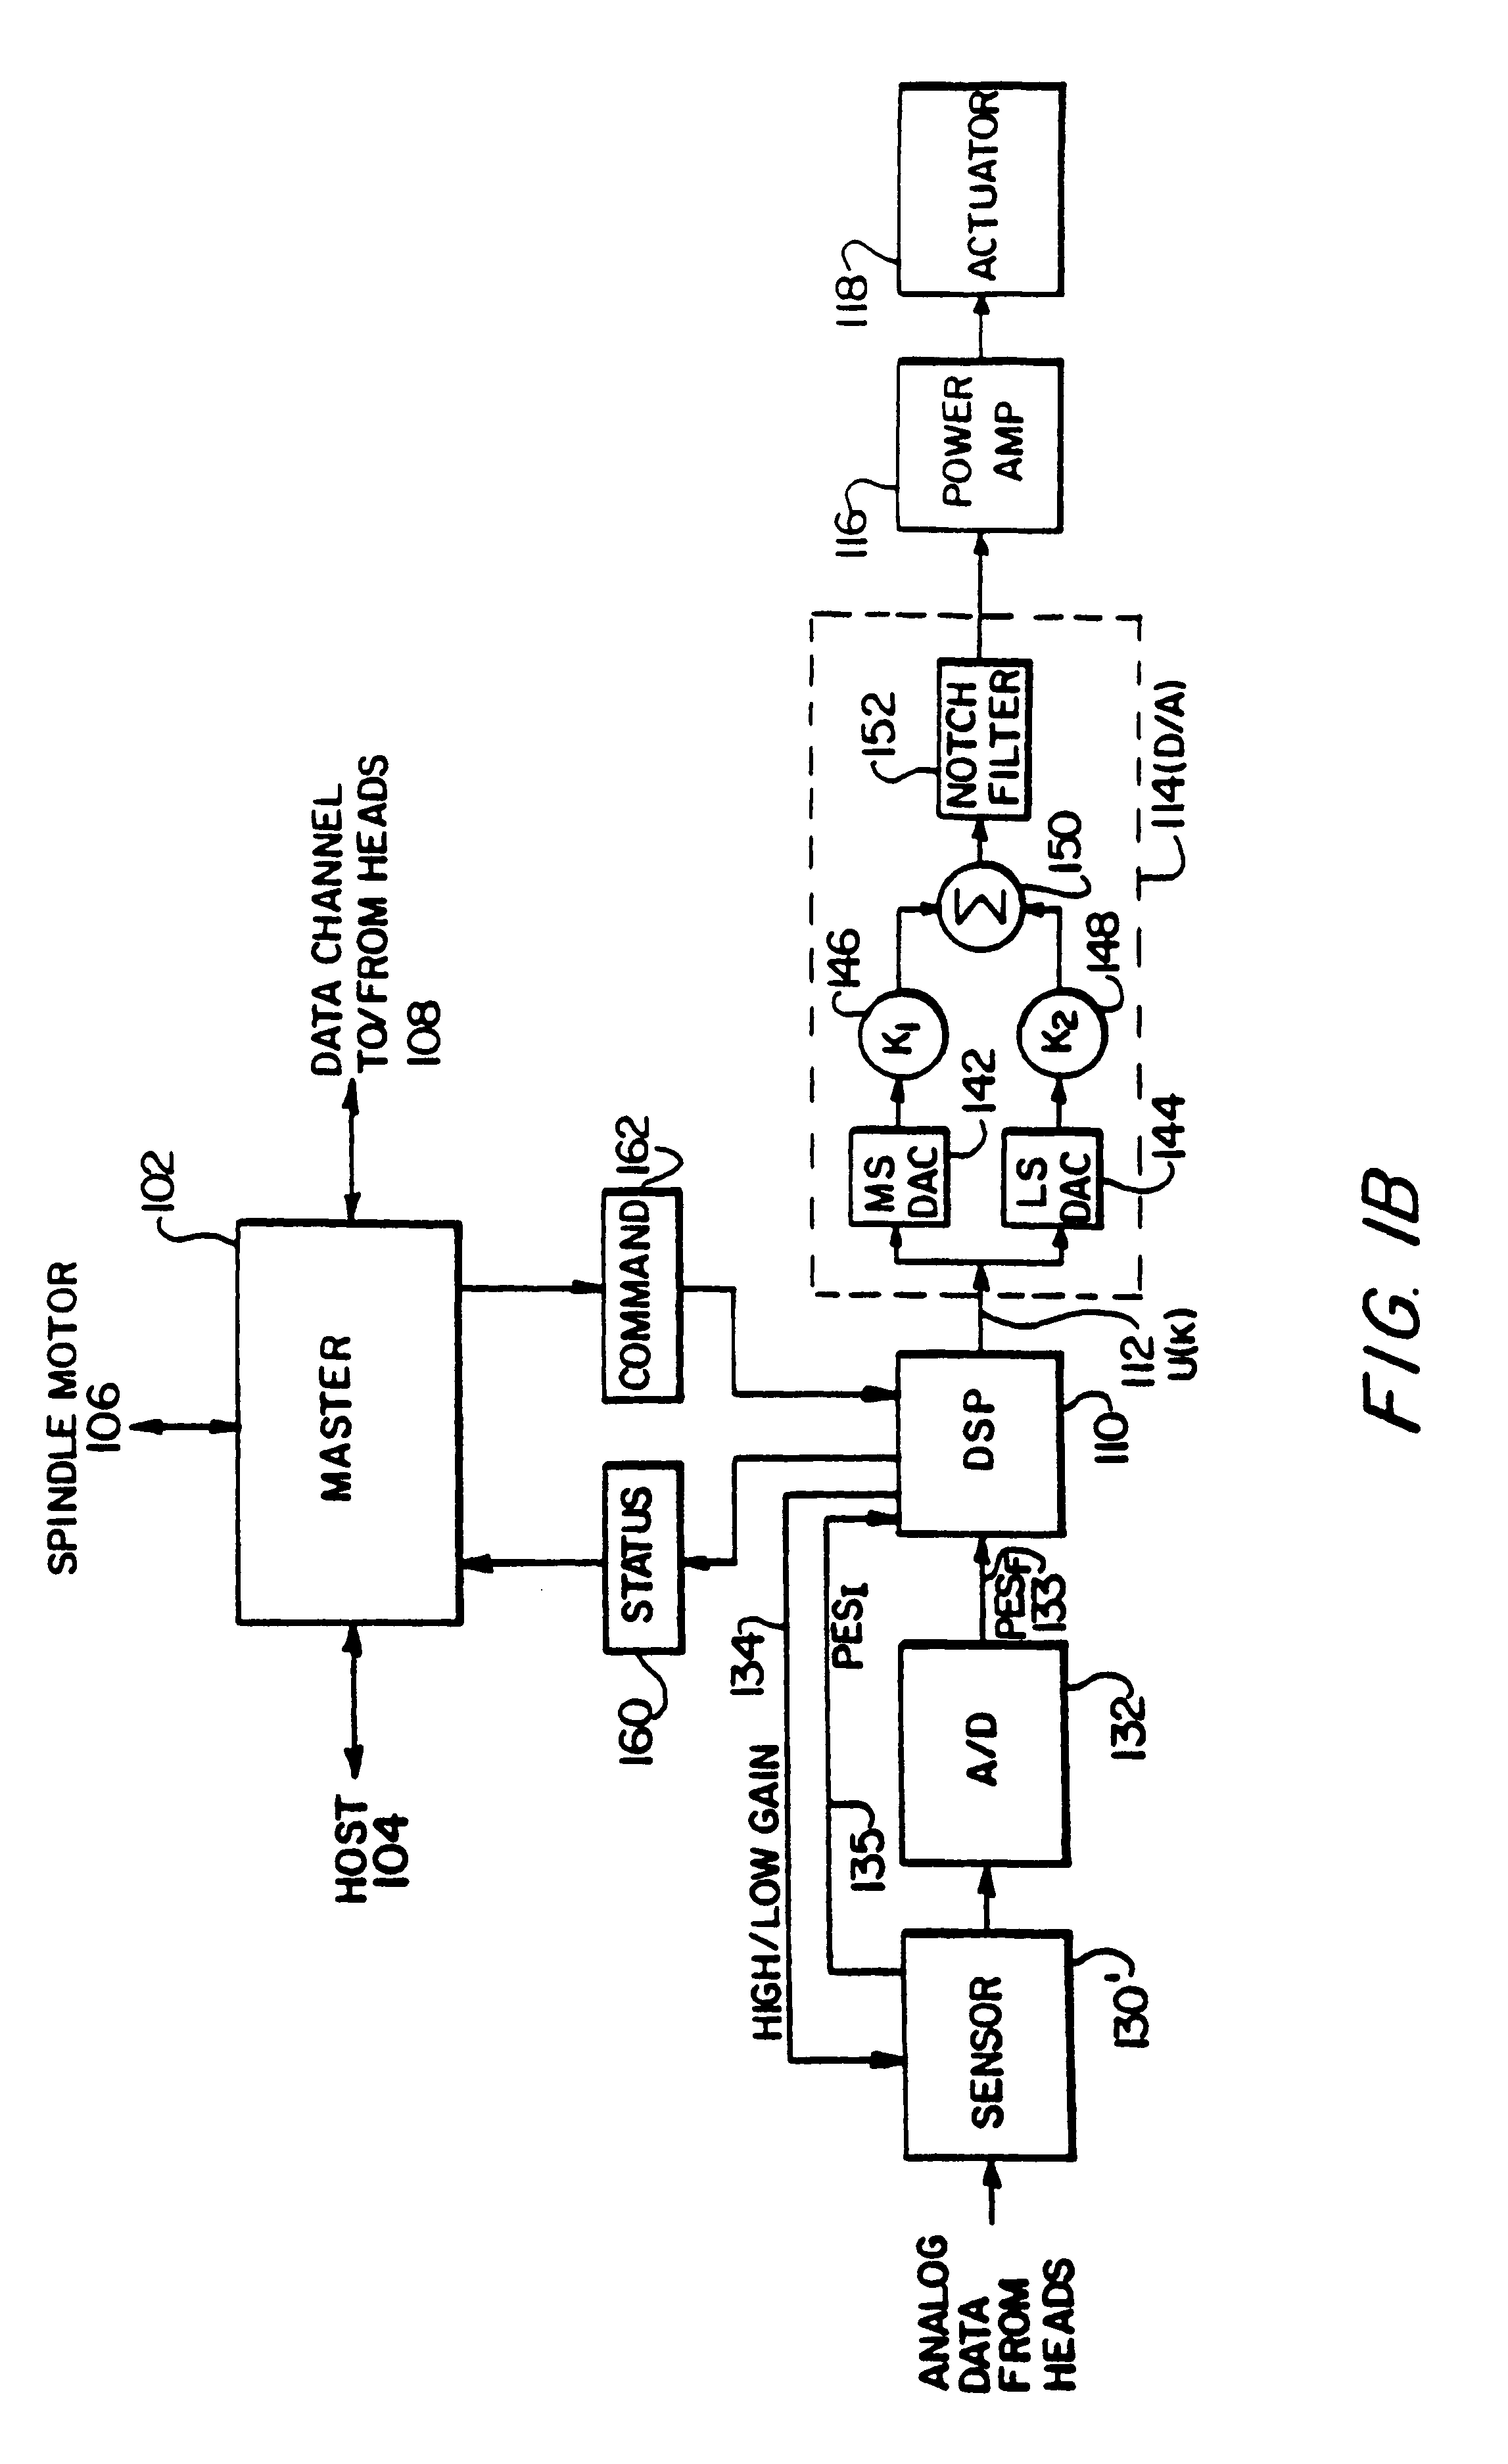 Digital servo control system for use in disk drives